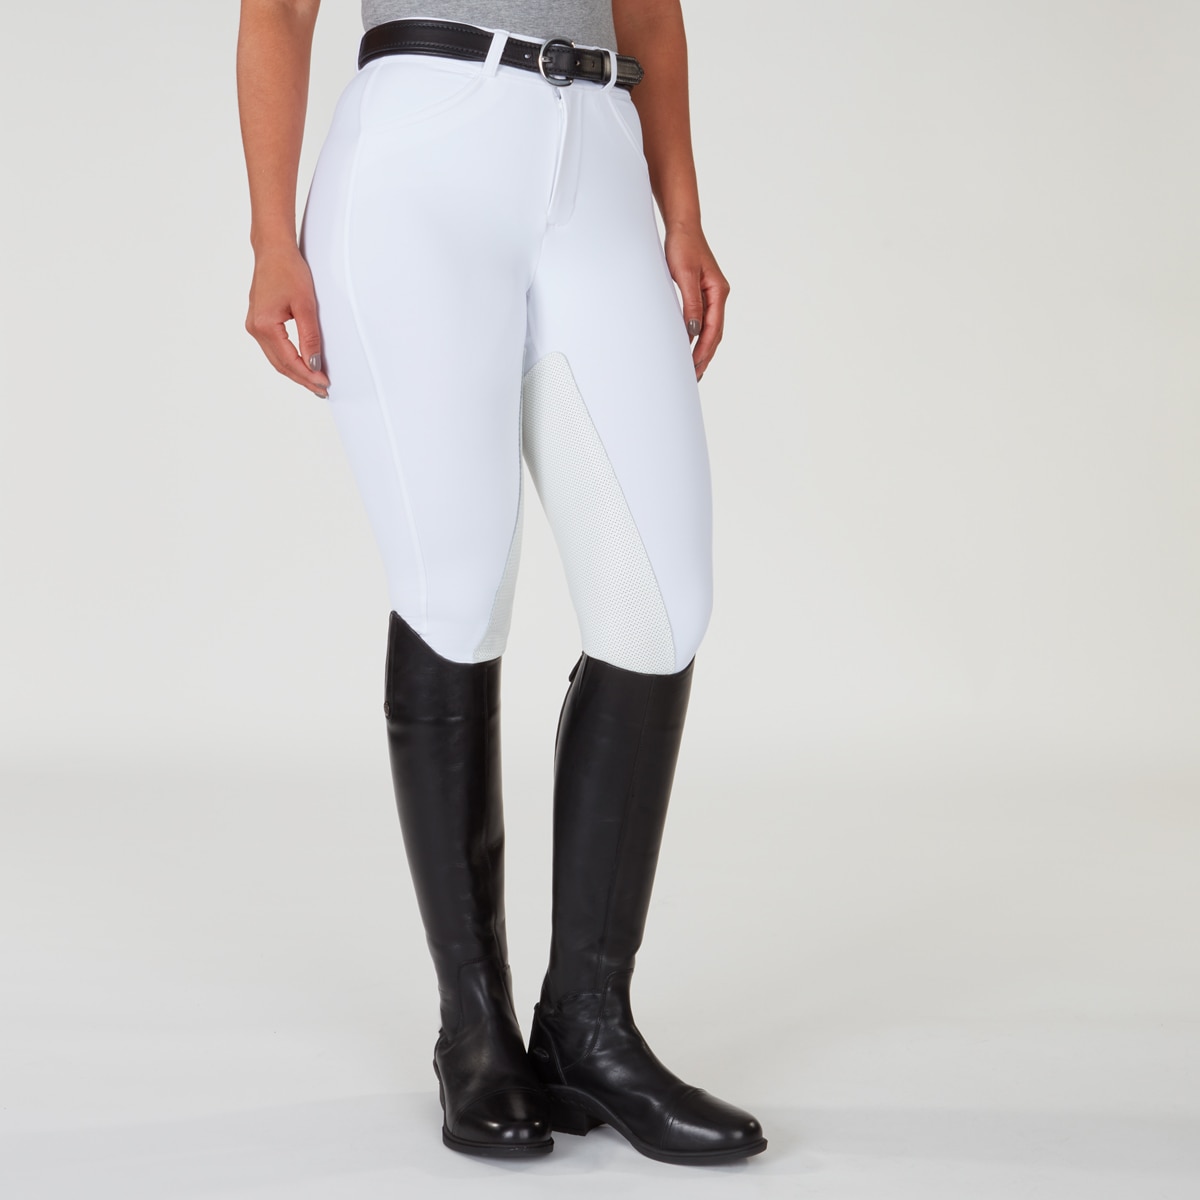 FITS PerforMAX Full Seat Breeches- Front Zip